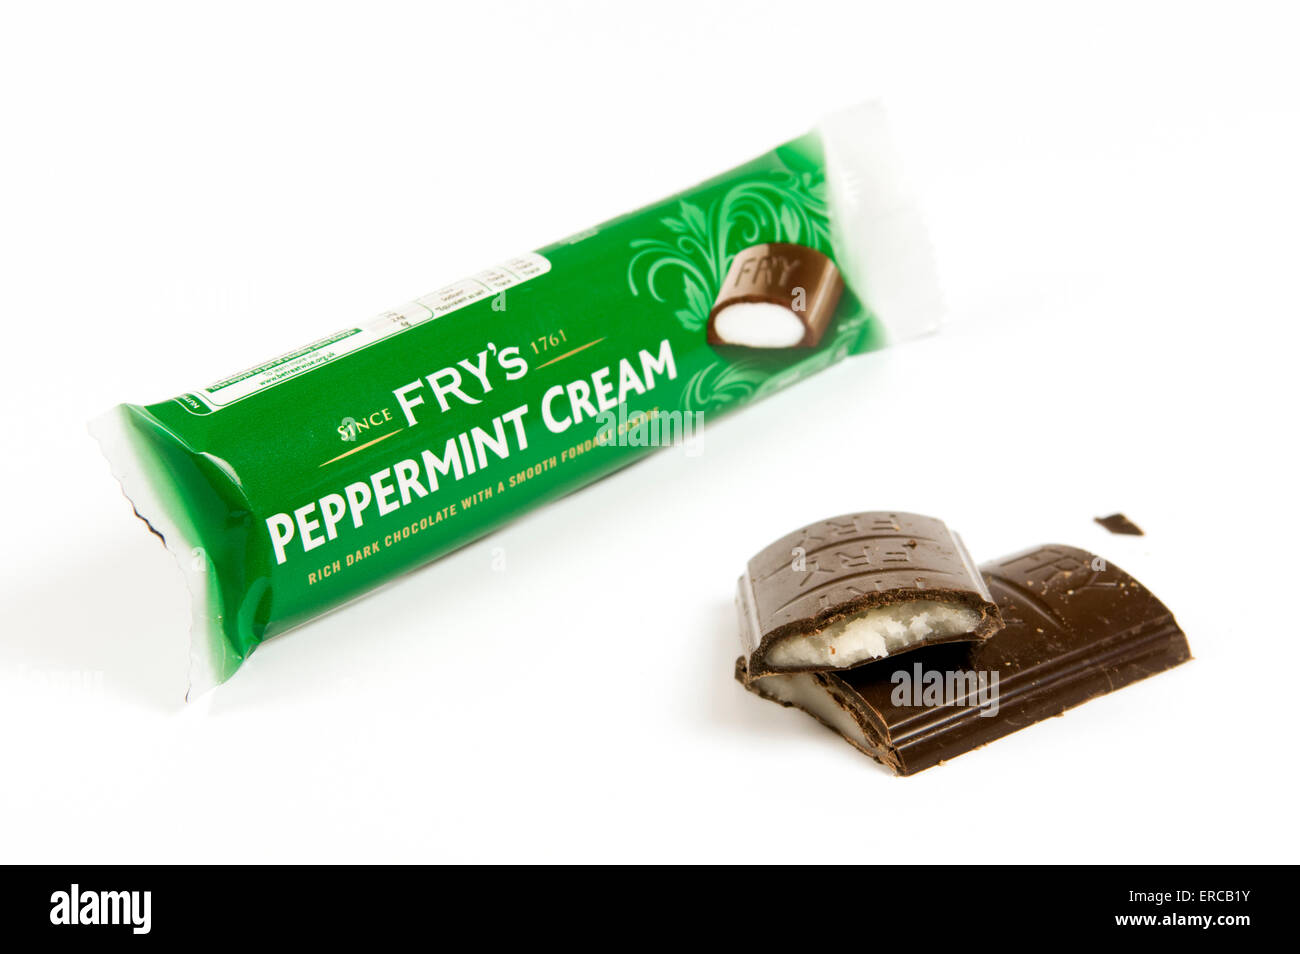 Fry's peppermint cream on white background with open cut up bar by the side Stock Photo